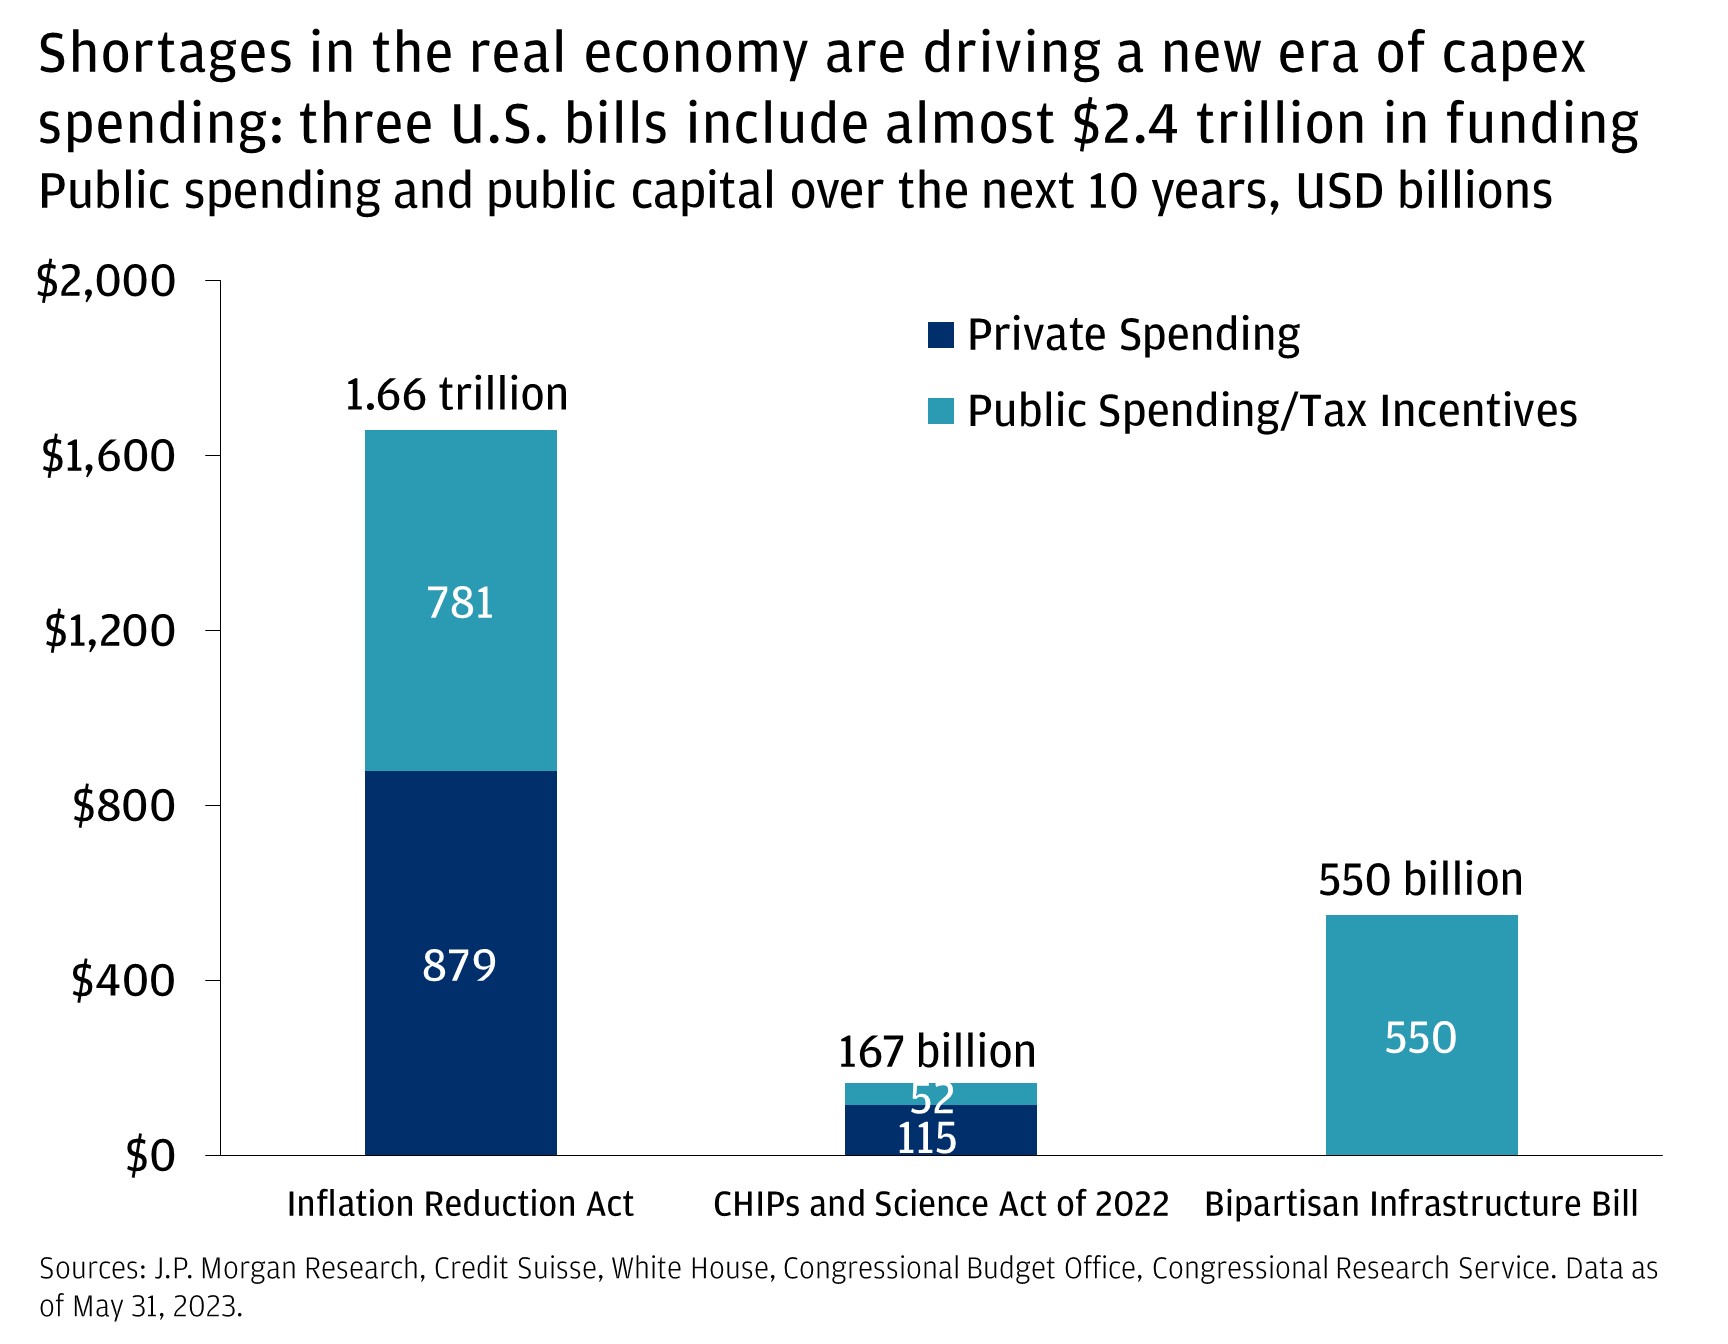 This chart shows the public spending and public capital over the next 10 years in USD billions. Across three separate bills, the expected spending is:  Inflation Reduction Act - $1.66trn: Private Spending: $879bn Public Spending/Tax Incentives: $781bn CHIPS and Science Act of 2022- $167bn: Private Spending: $115bn Public Spending/Tax Incentives: $52bn Inflation Reduction Act - $550bn: Private Spending: $0bn Public Spending/Tax Incentives: $550bn